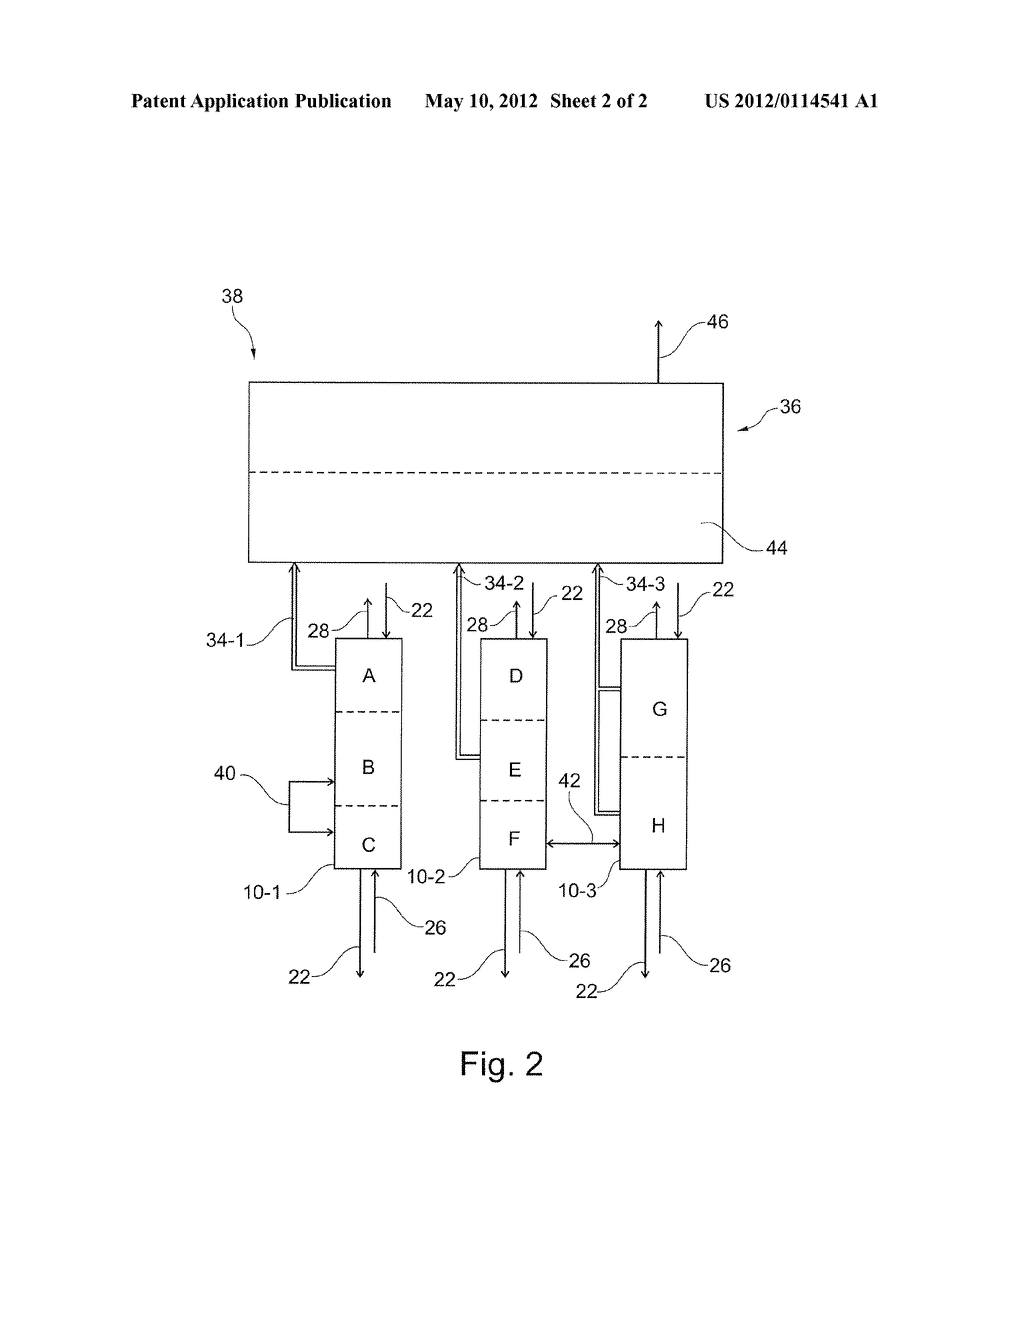 METHOD FOR MANUFACTURING A PRODUCT GAS AND GENERATING STEAM, AND MODULAR     PRODUCT GAS-STEAM REACTOR FOR CARRYING OUT SAID METHOD - diagram, schematic, and image 03